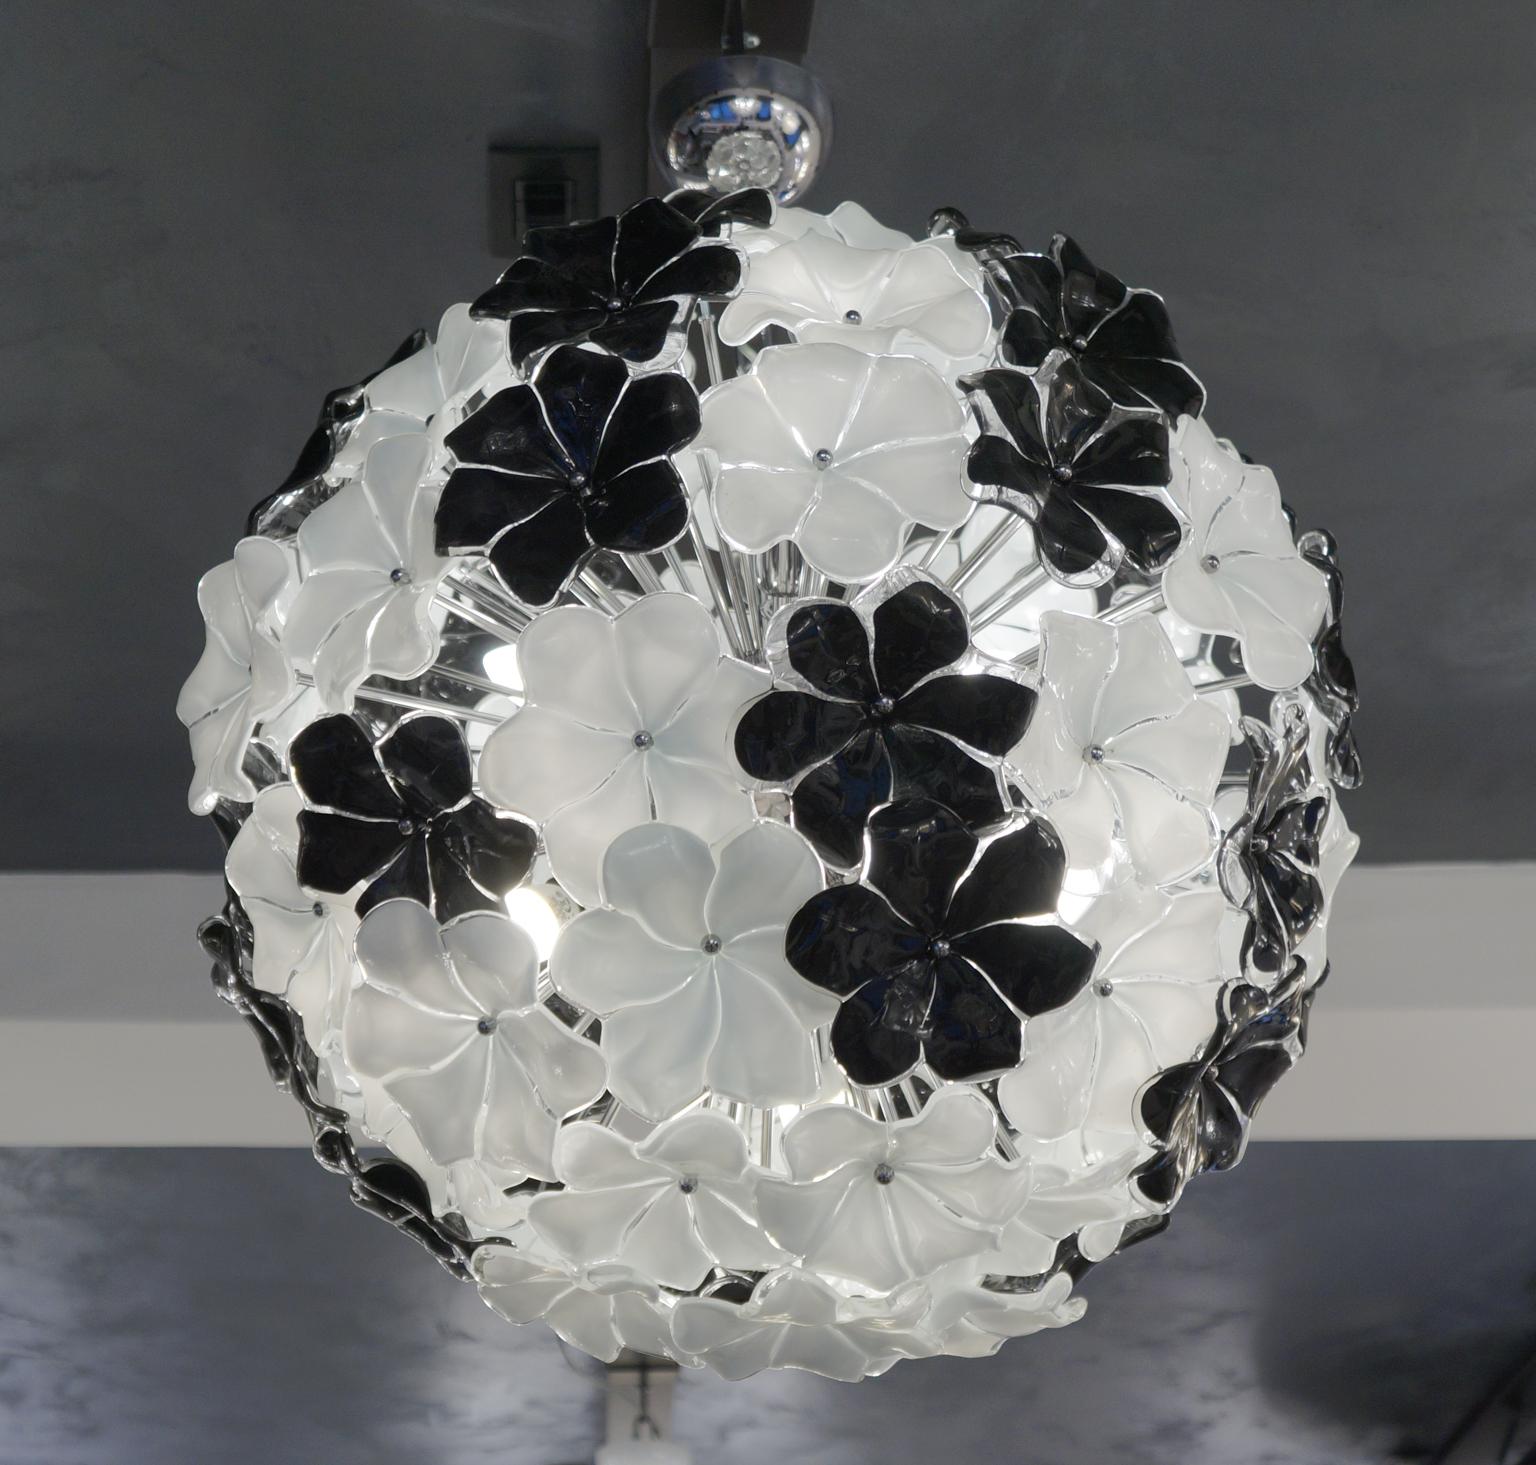 Exclusive flowers chandelier in Murano blown glass, black and white colour
Entirely worked by hand with extreme care and precision. Work performed by Alberto Donà in 1994. 
The chandelier contains 81 elements of flowers in Murano glass and six